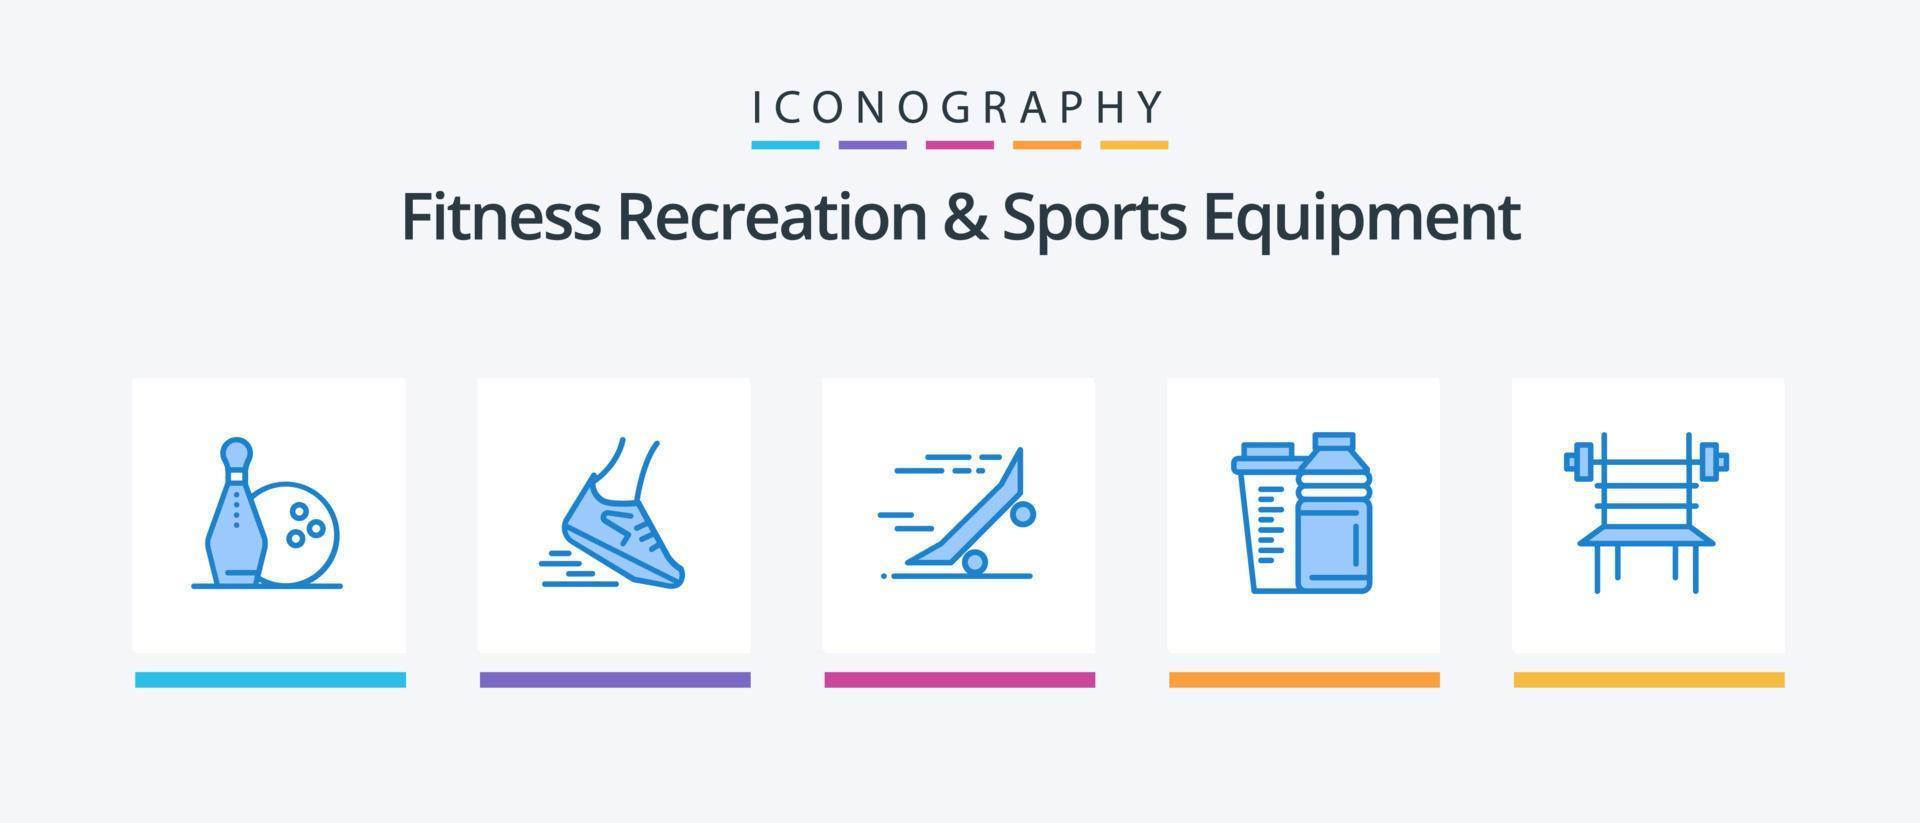 Fitness Recreation And Sports Equipment Blue 5 Icon Pack Including shaker. drink. running. bottle. skate board. Creative Icons Design vector